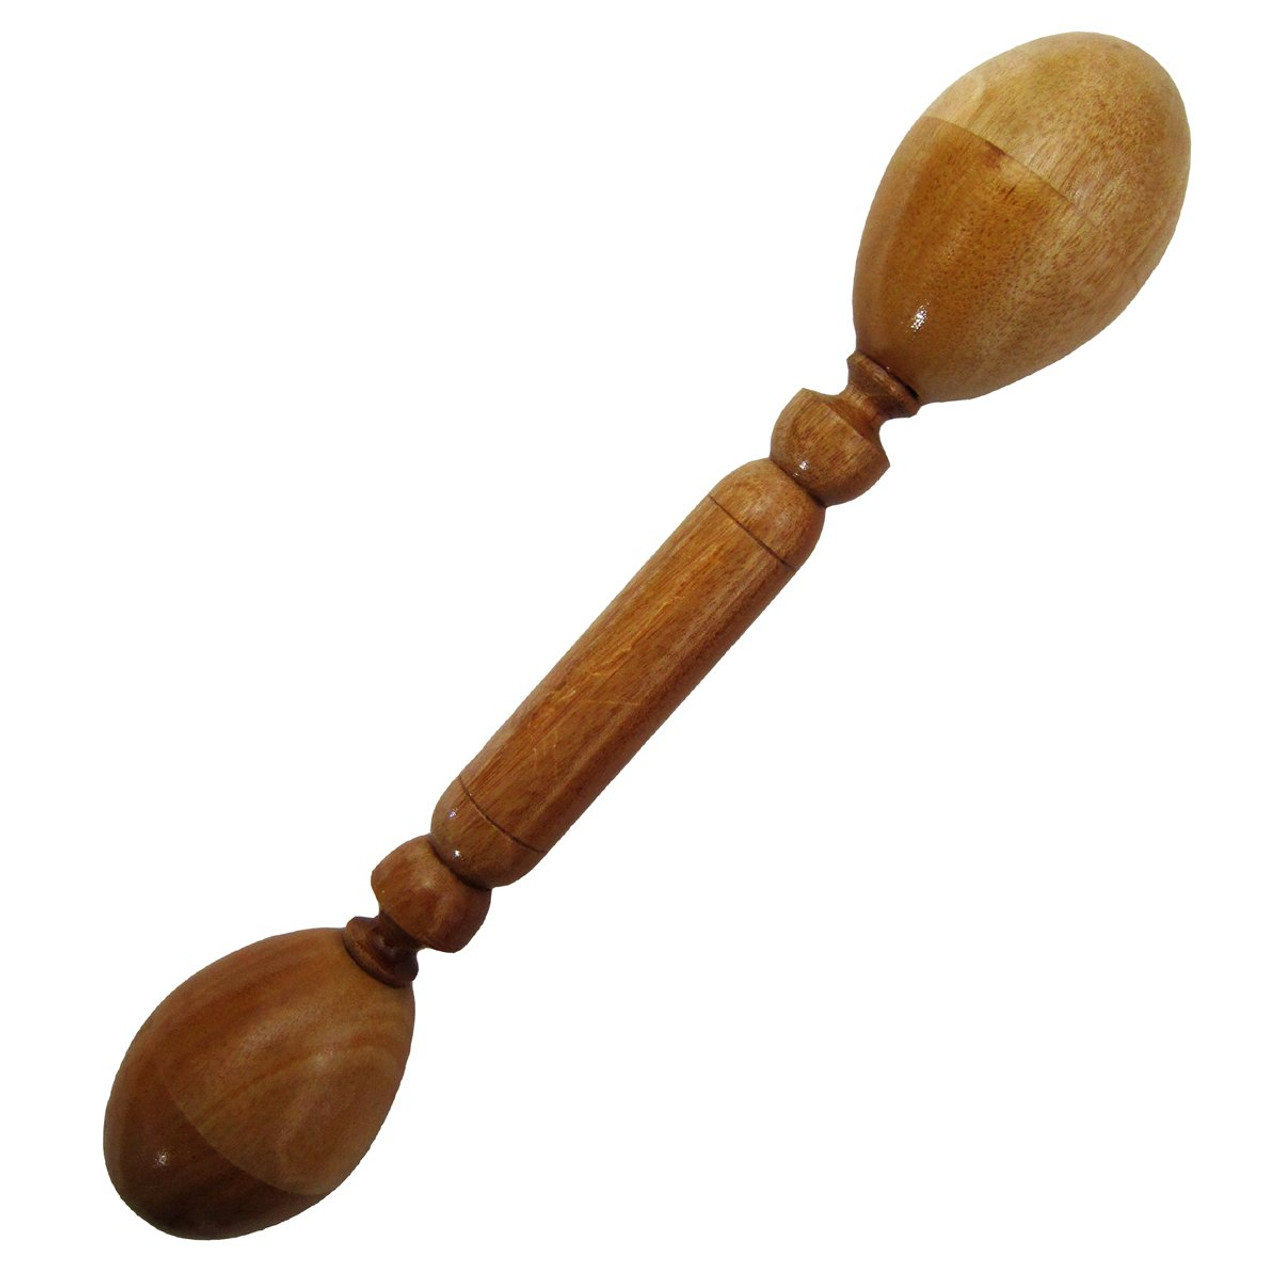 2 Wooden Wood Maraca Rattles Shaker Percussion Kid Baby Musical Toy Fa YIM 